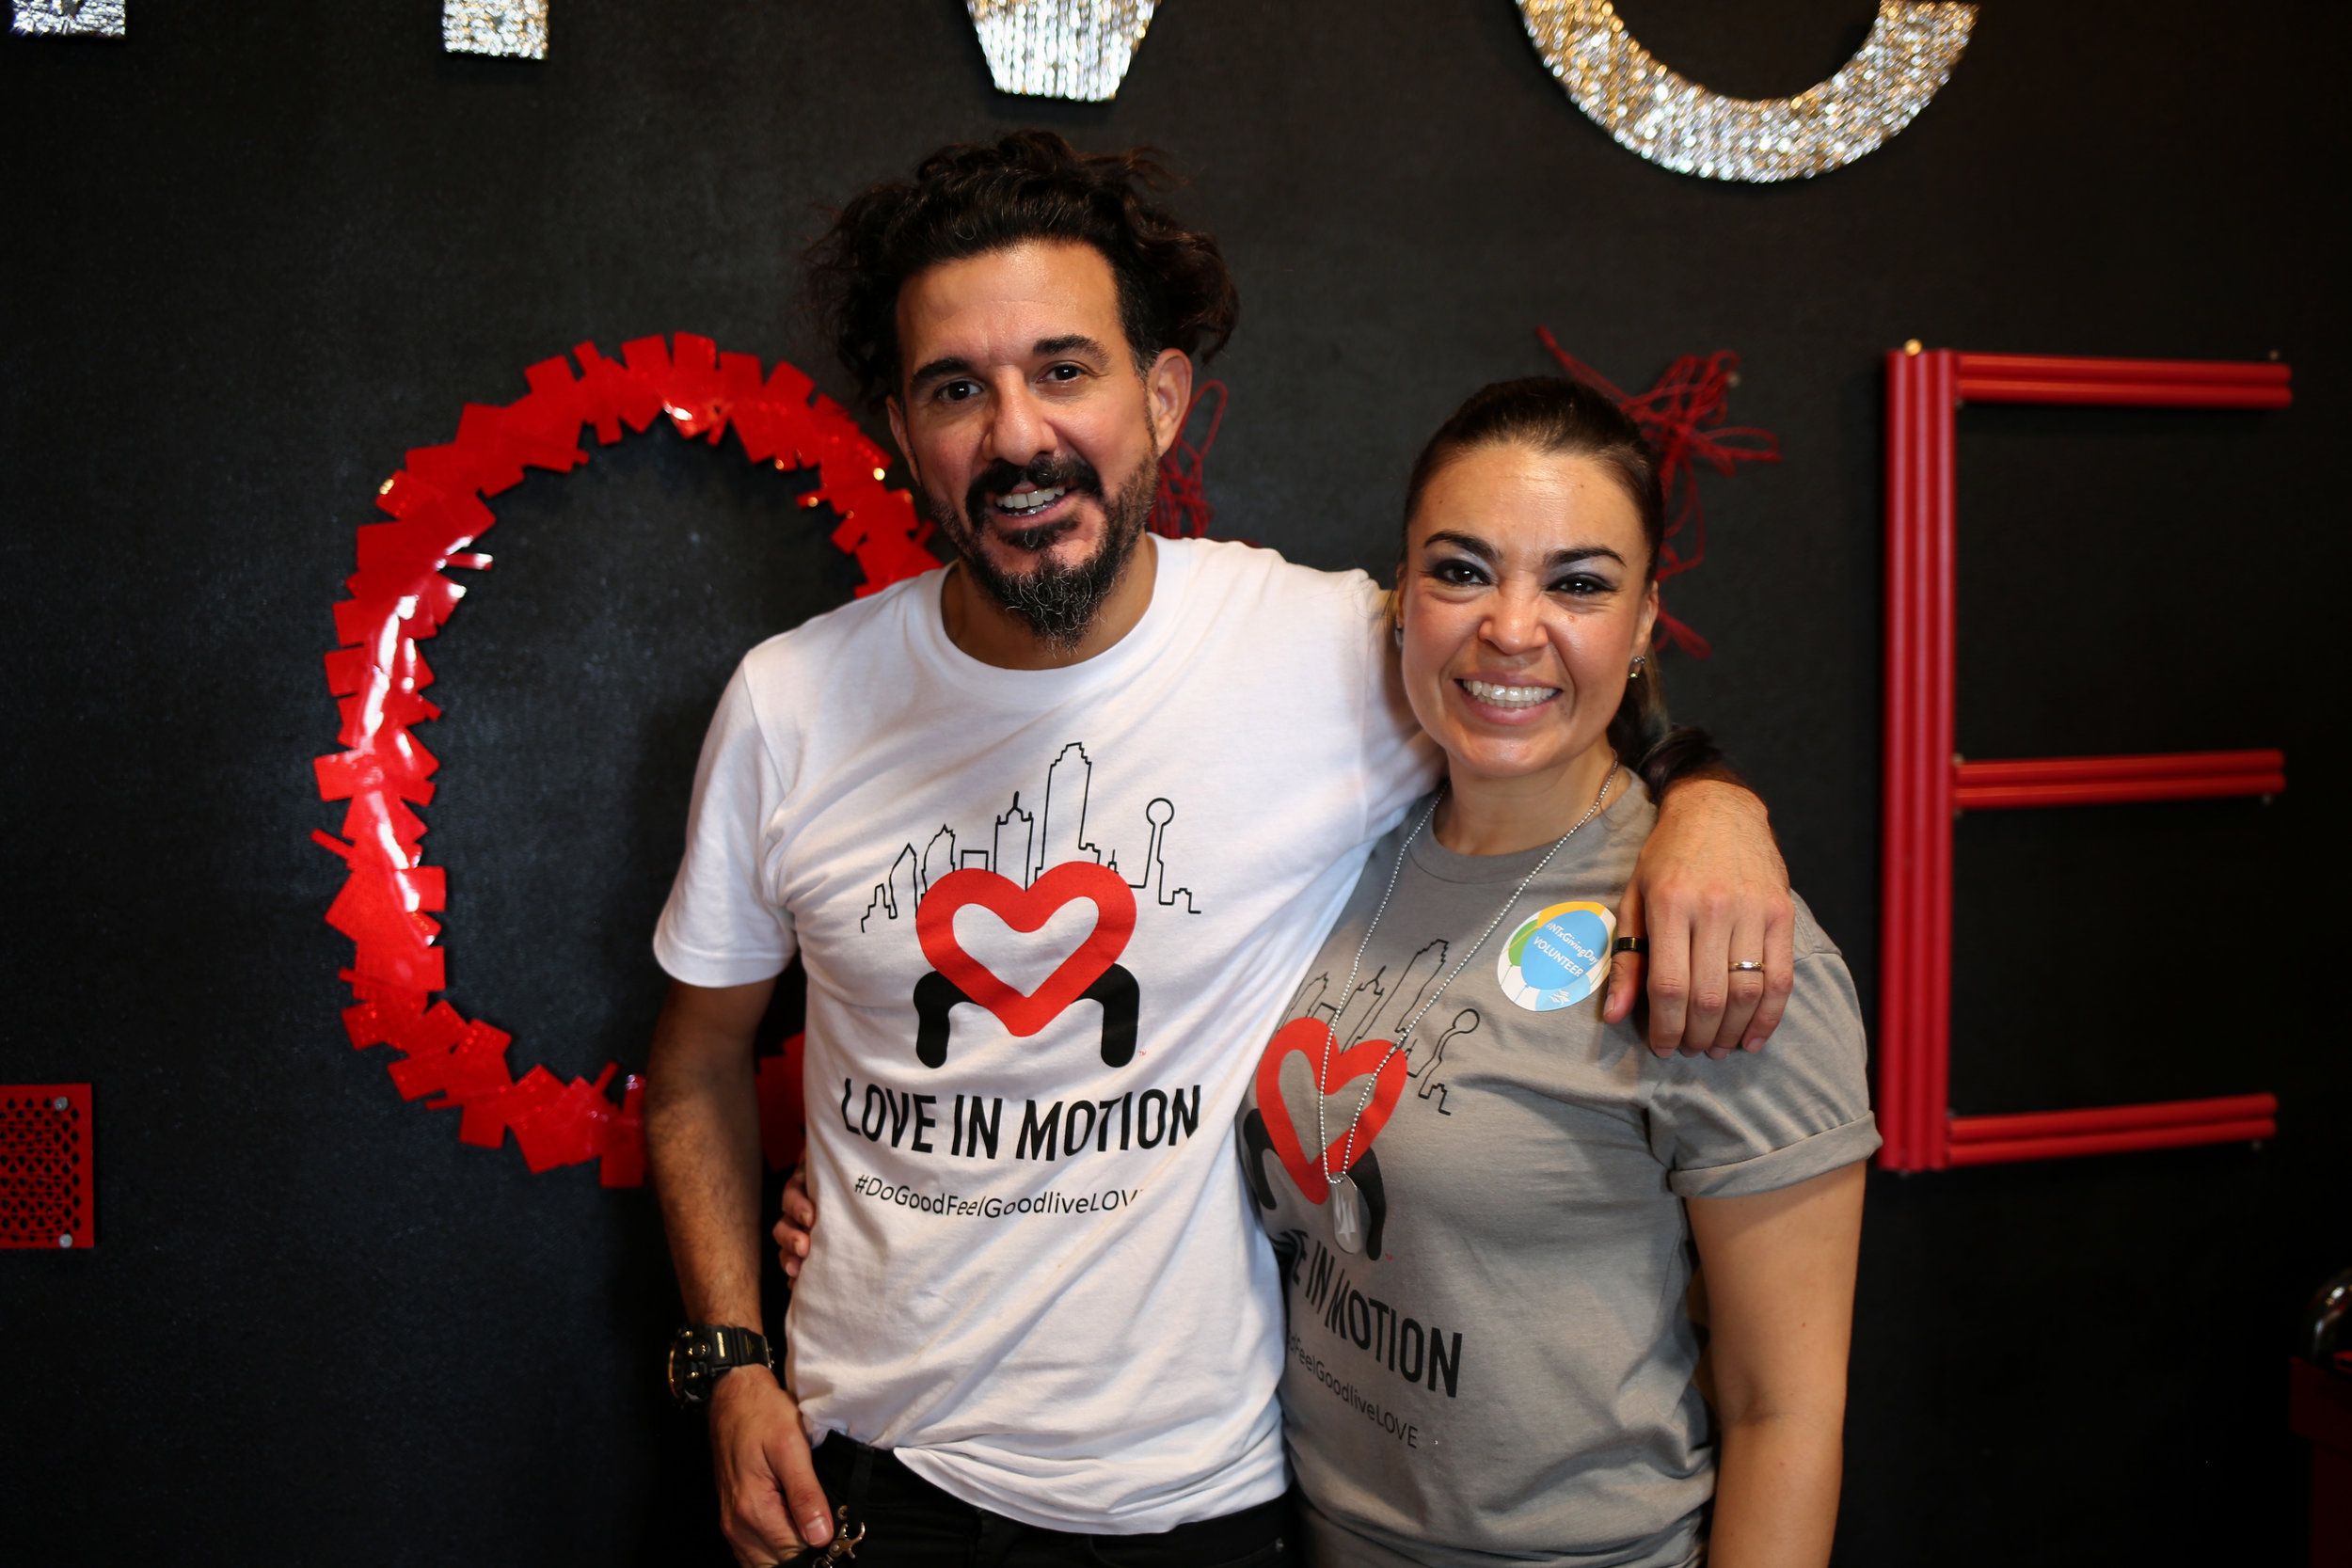 Pollo and wife, Polla, at the Love in Motion headquarters in Deep Ellum.